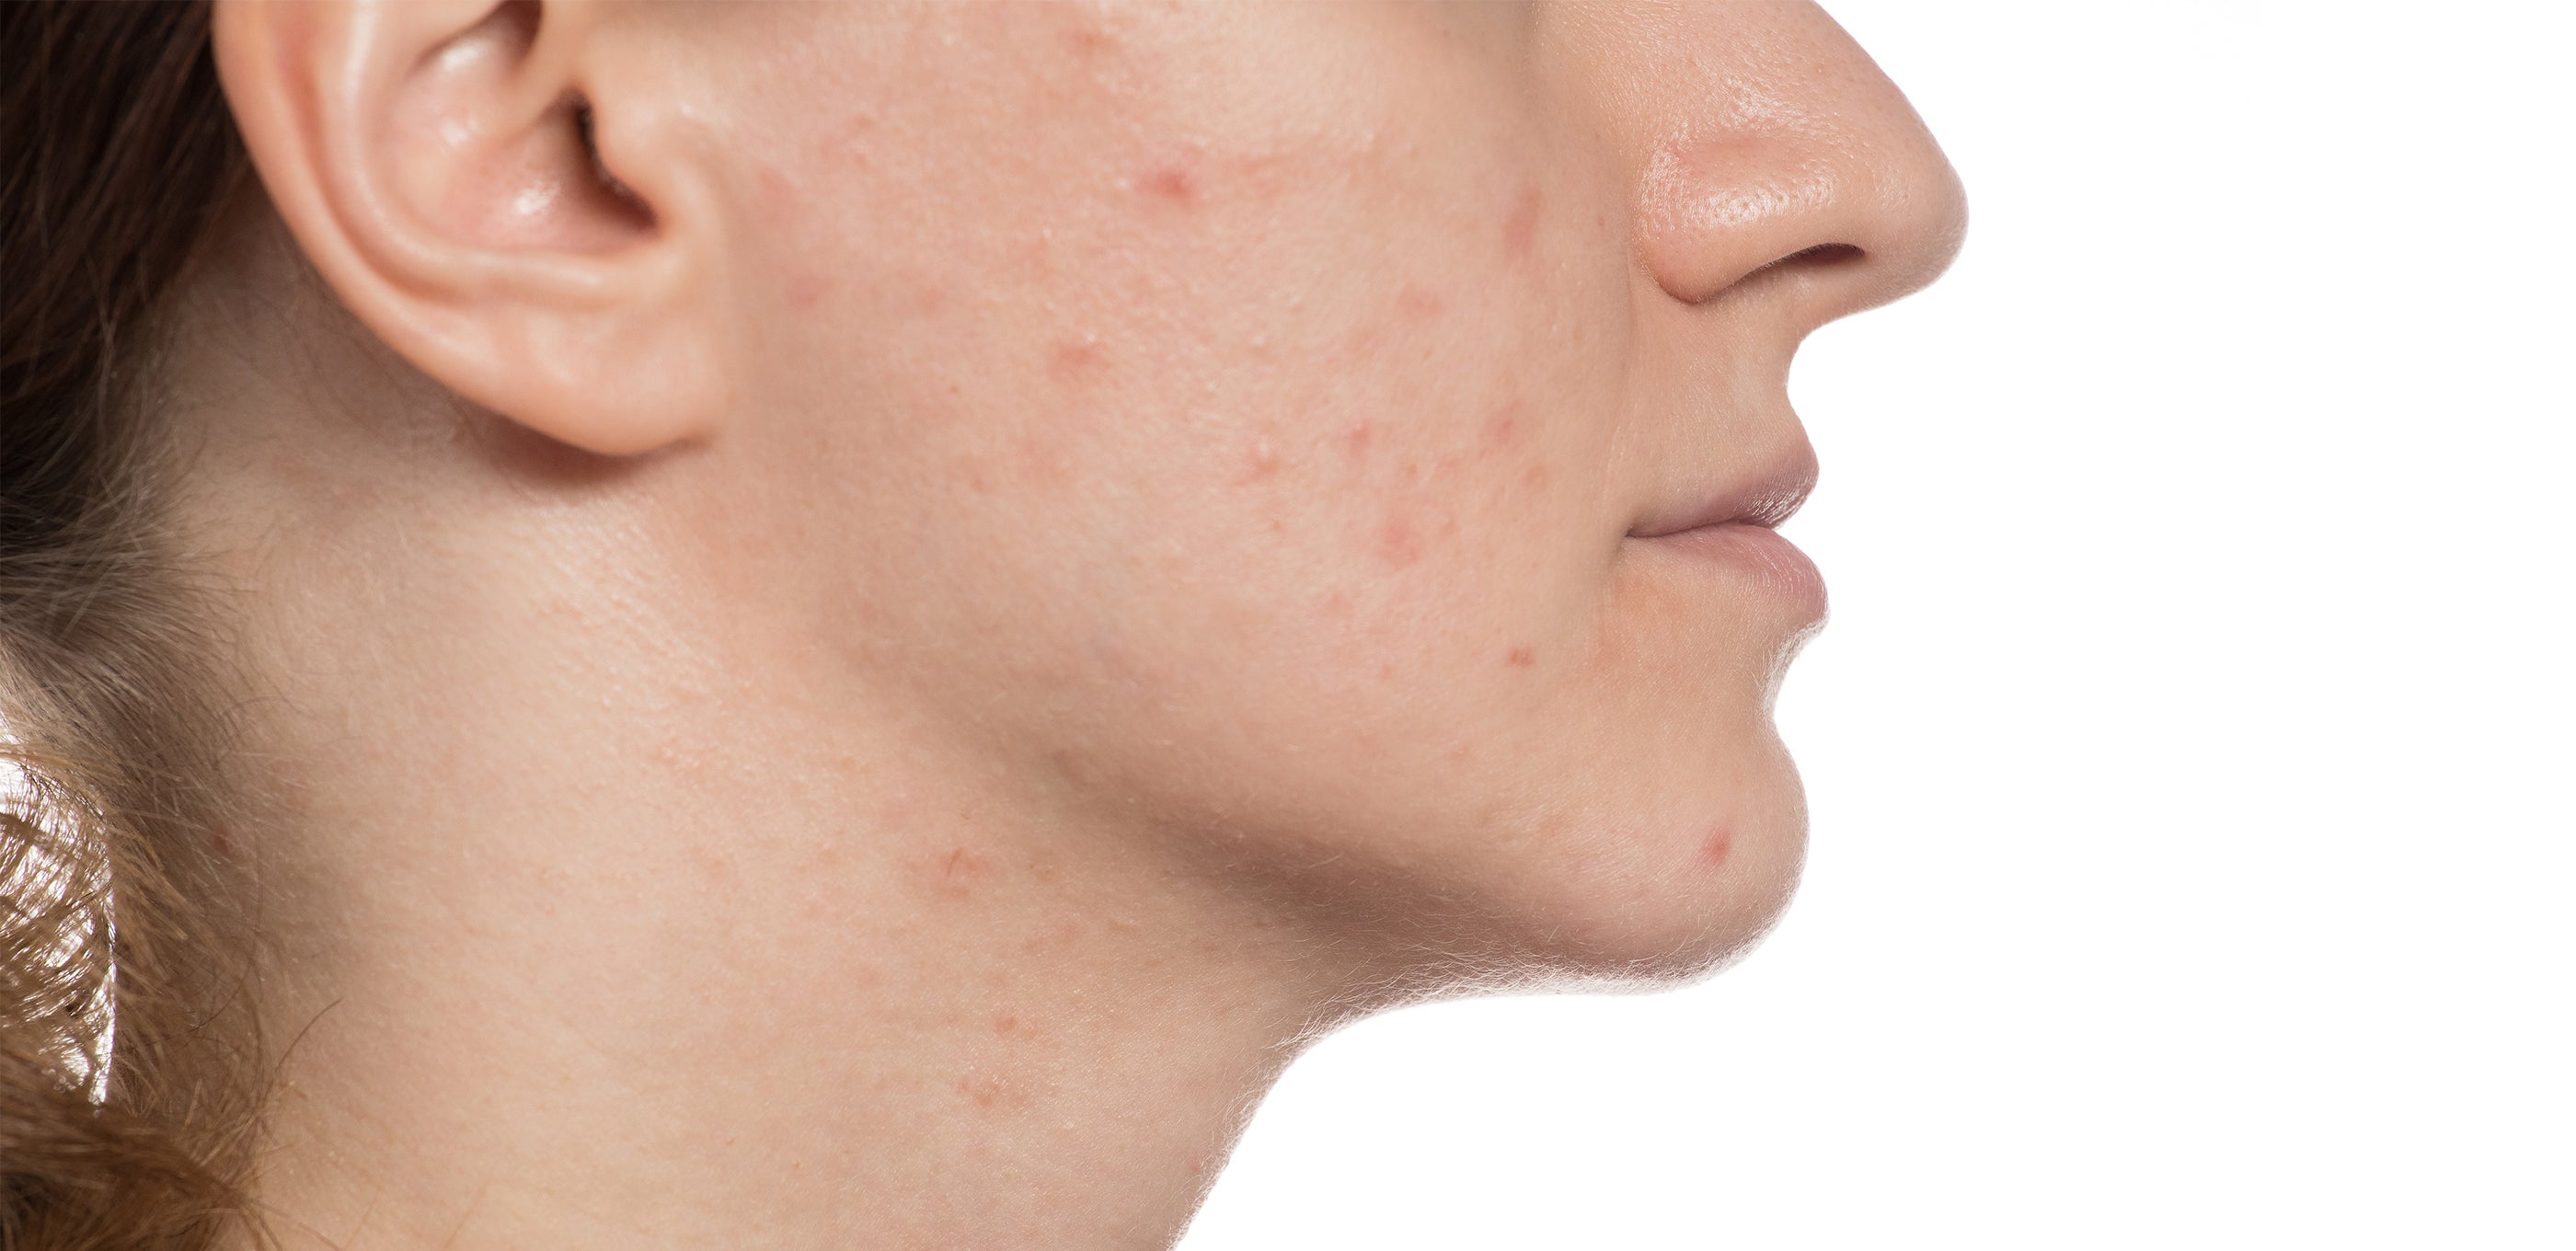 Side view of woman face with visible acne marks before using JOVS LED therapy patches.